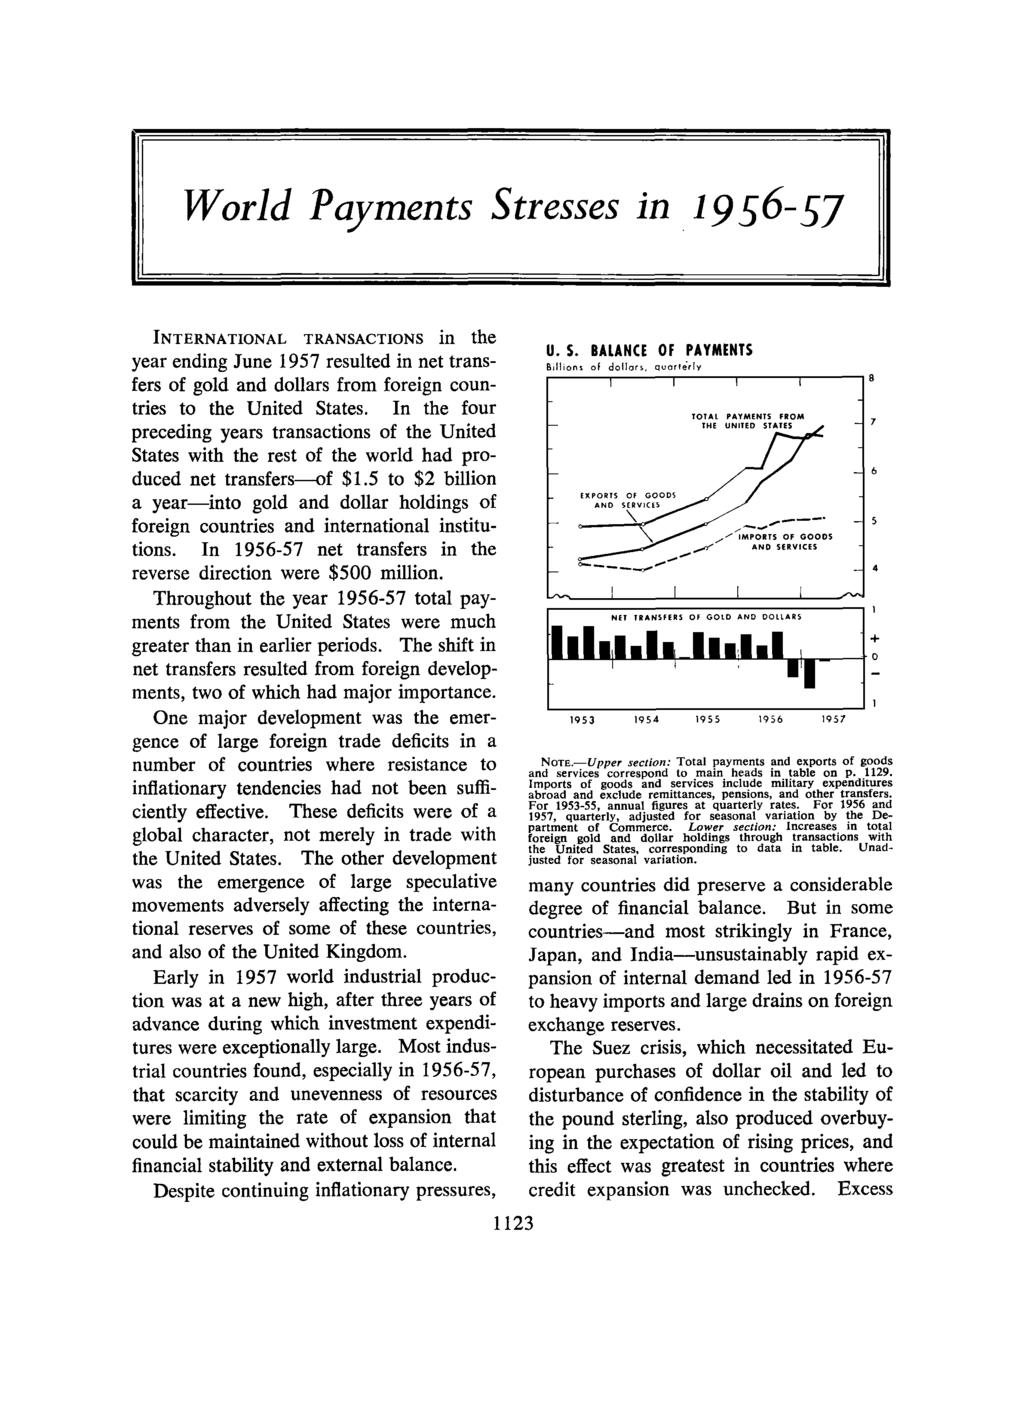 World Payments Stresses in 1956-57 INTERNATIONAL TRANSACTIONS in the year ending June 1957 resulted in net transfers of gold and dollars from foreign countries to the United States.